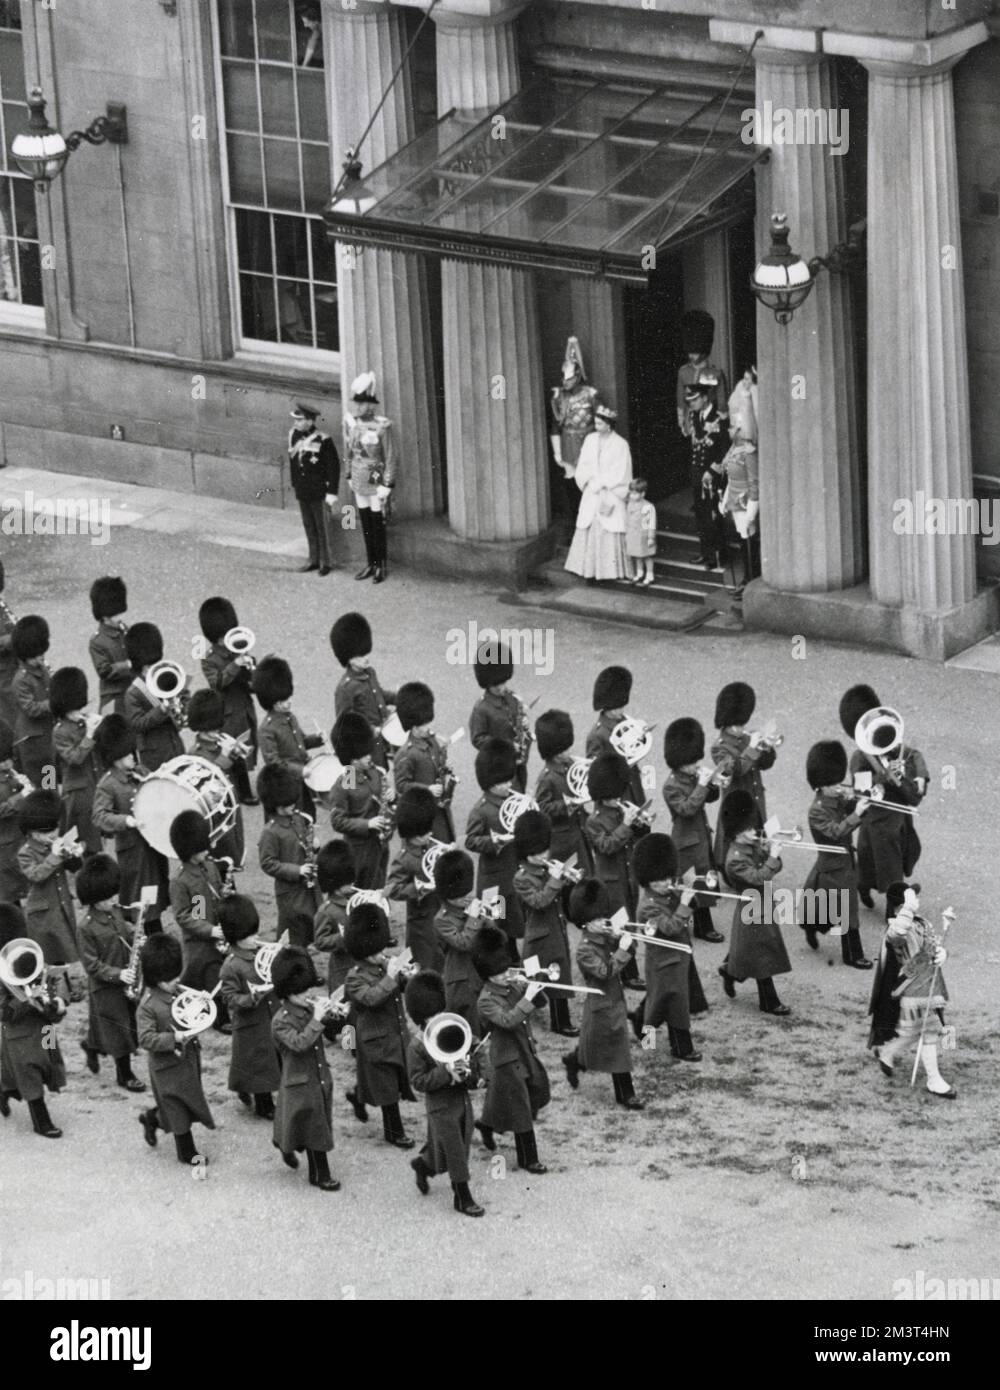 Scene in the forecourt of Buckingham Palace showing Prince Charles (King Charles III) at the side of his mother, Queen Elizabeth II, as they watch a march past of the Guards band, on return of her Majesty and the Duke of Edinburgh to the Palace after the State Opening of Parliament in 1952. Stock Photo